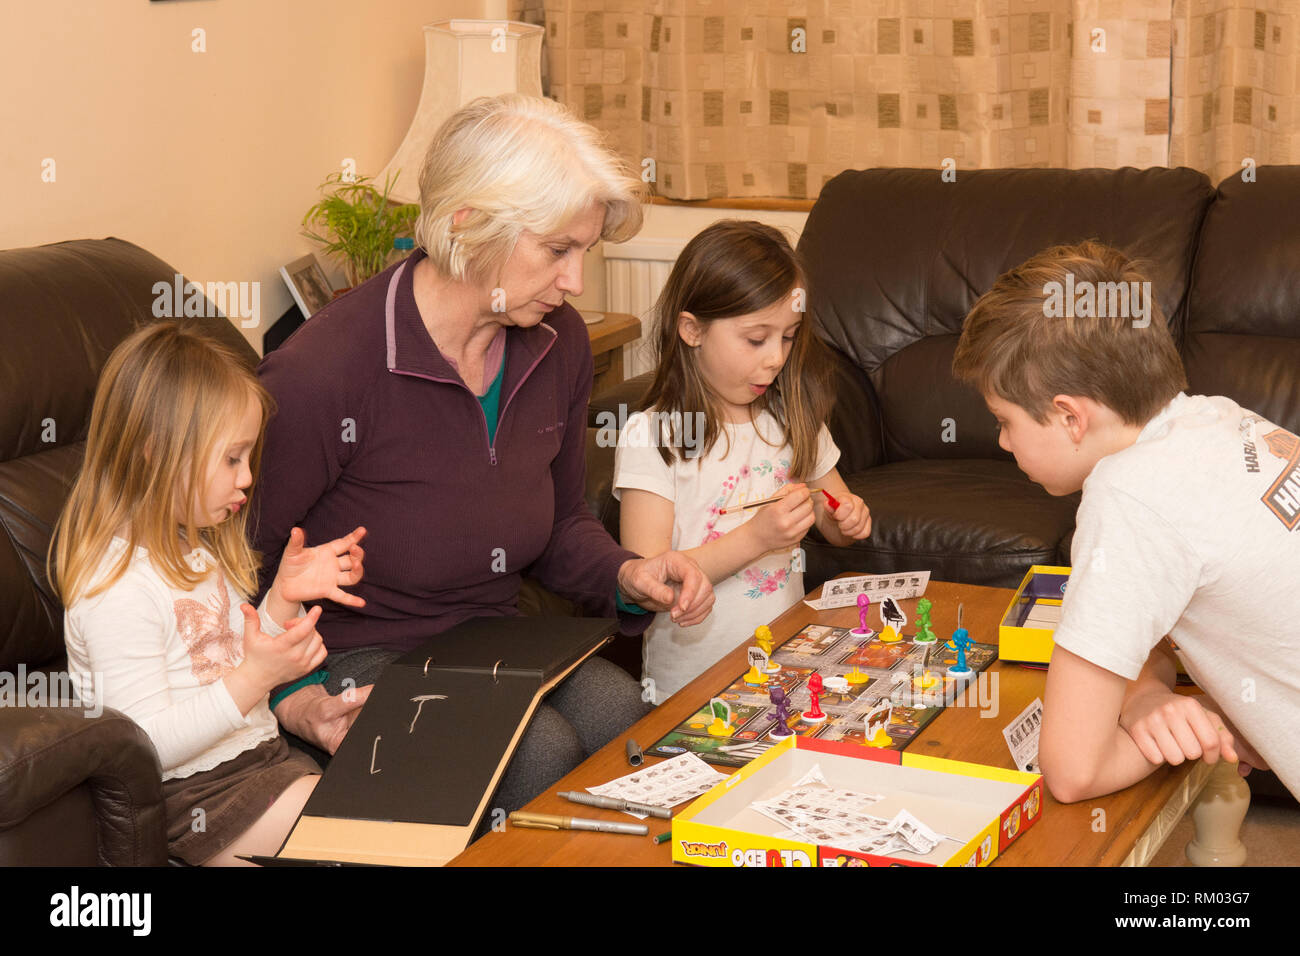 grandmother, granny, playing board game with three grandchildren, aged two to twelve, two girls, one boy. Stock Photo